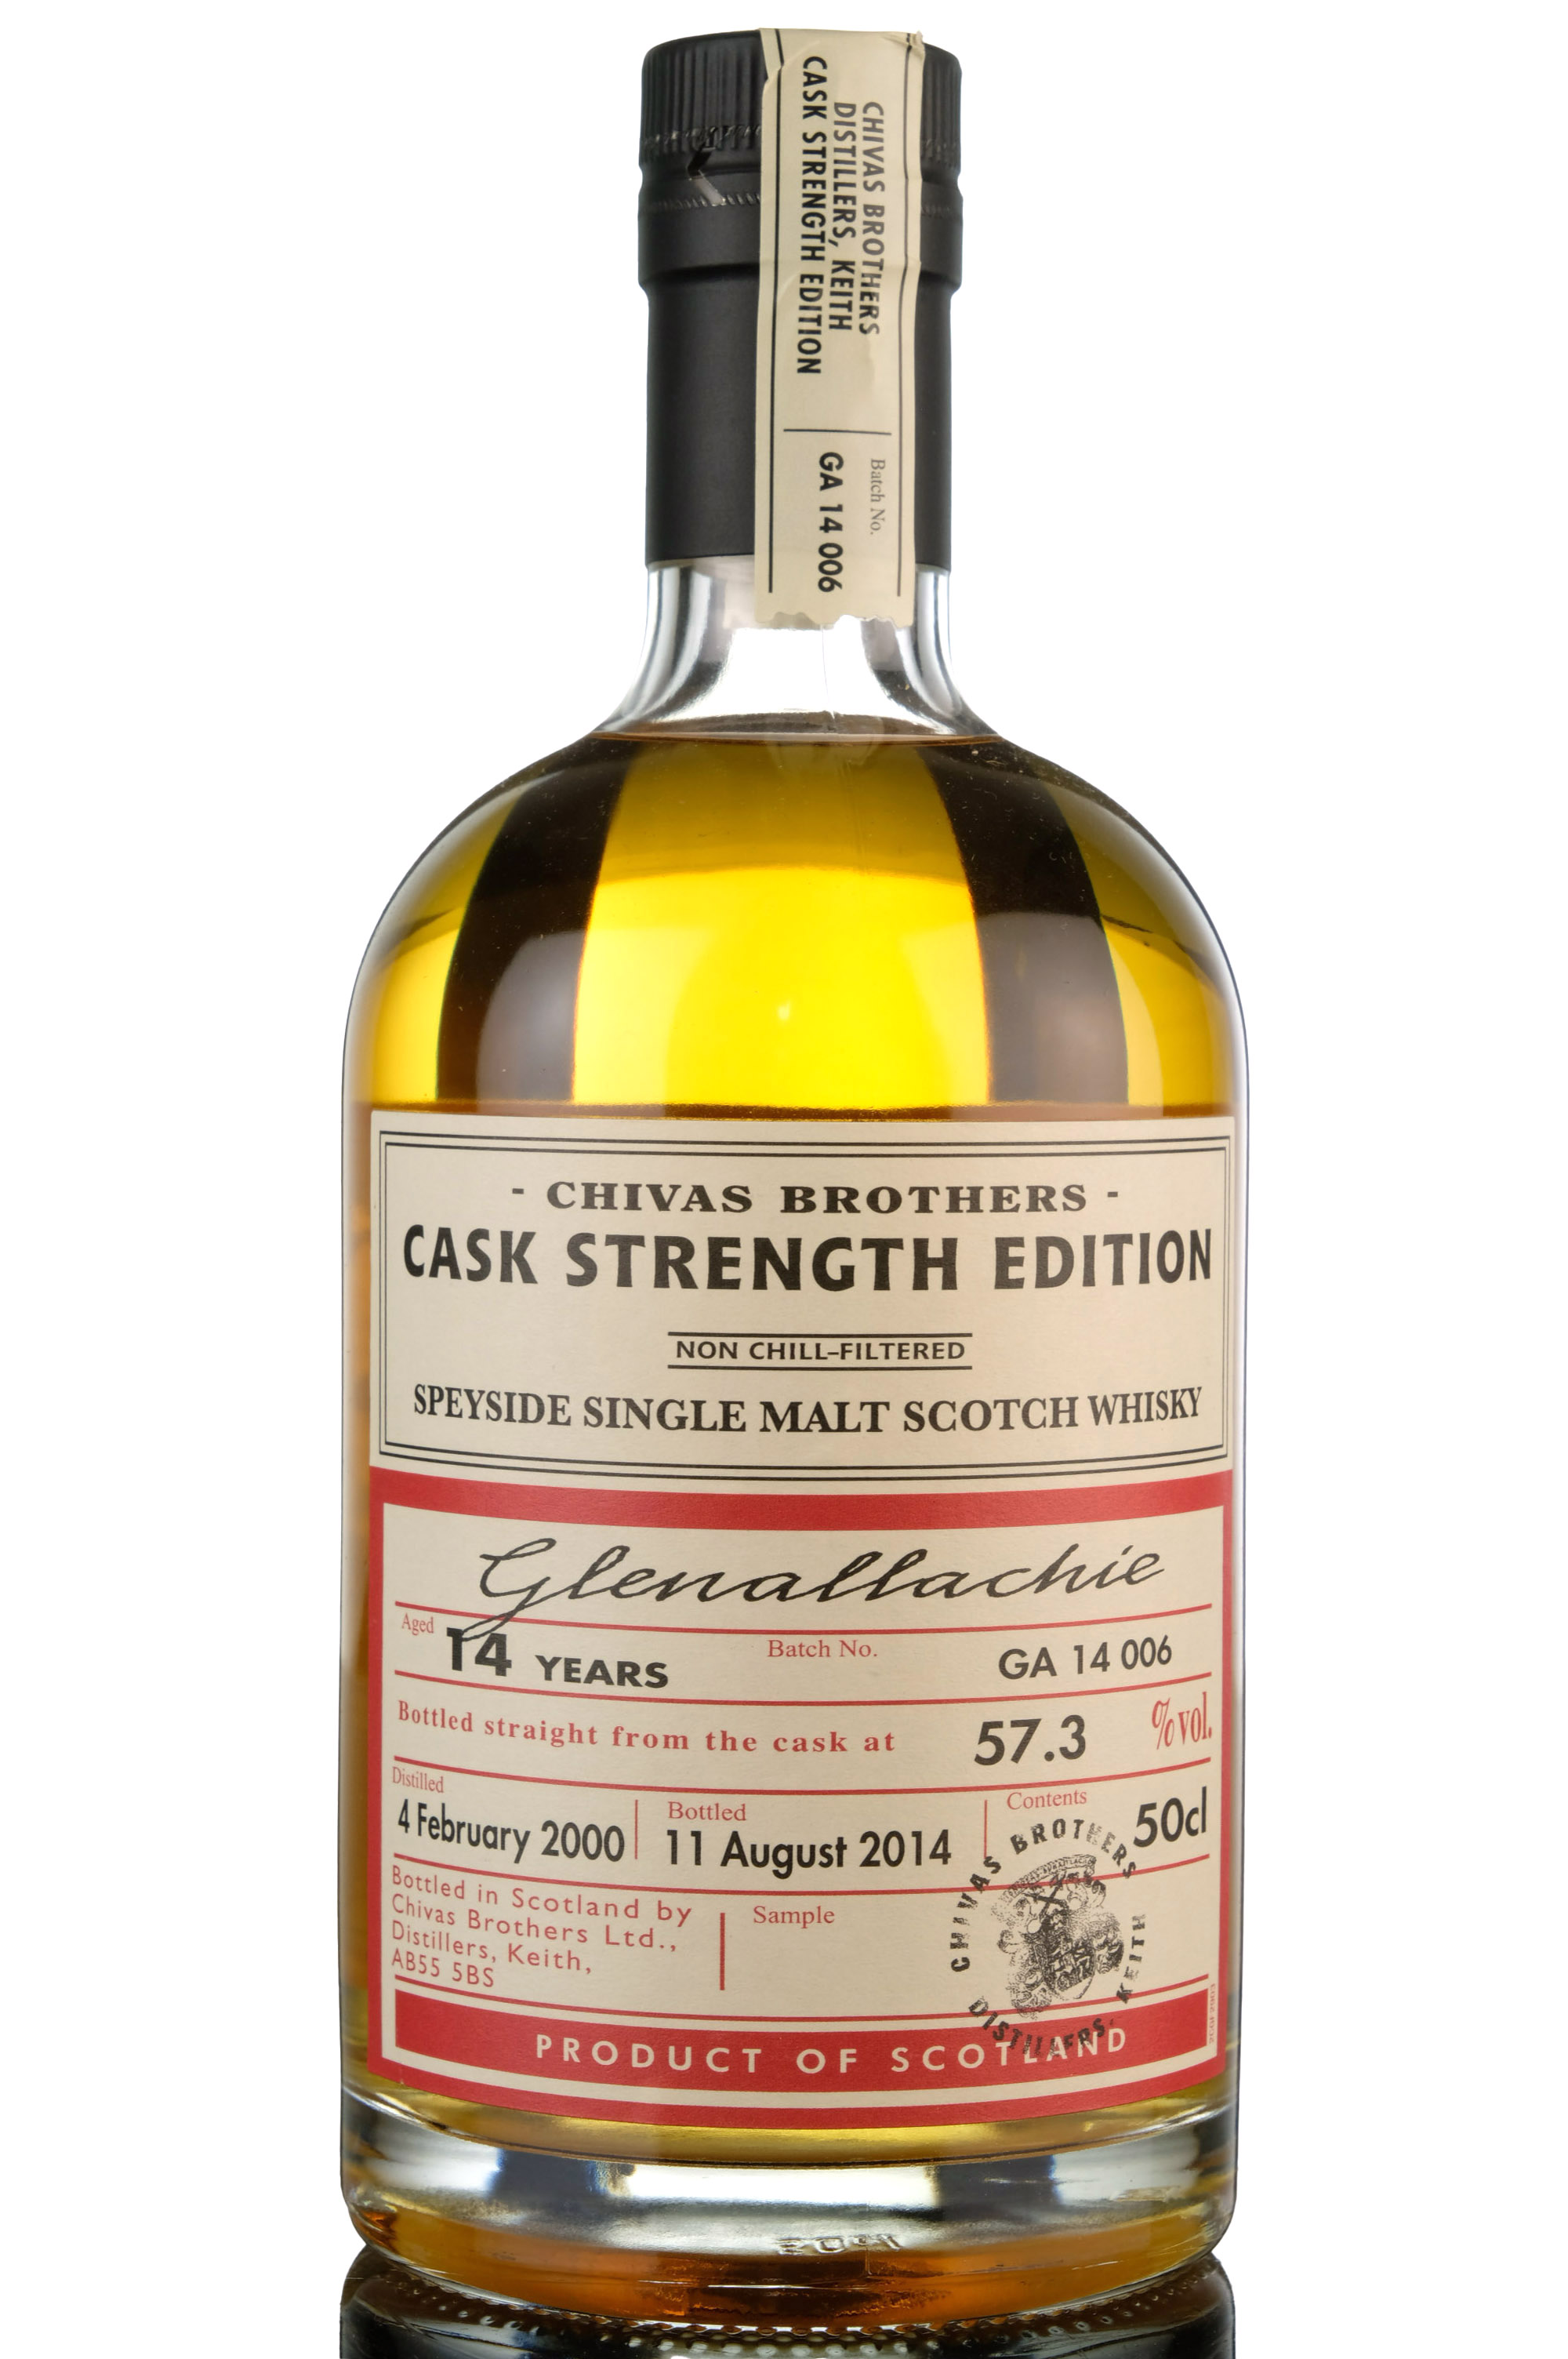 Glenallachie 2000-2014 - 14 Year Old - Chivas Brothers Cask Strength Edition